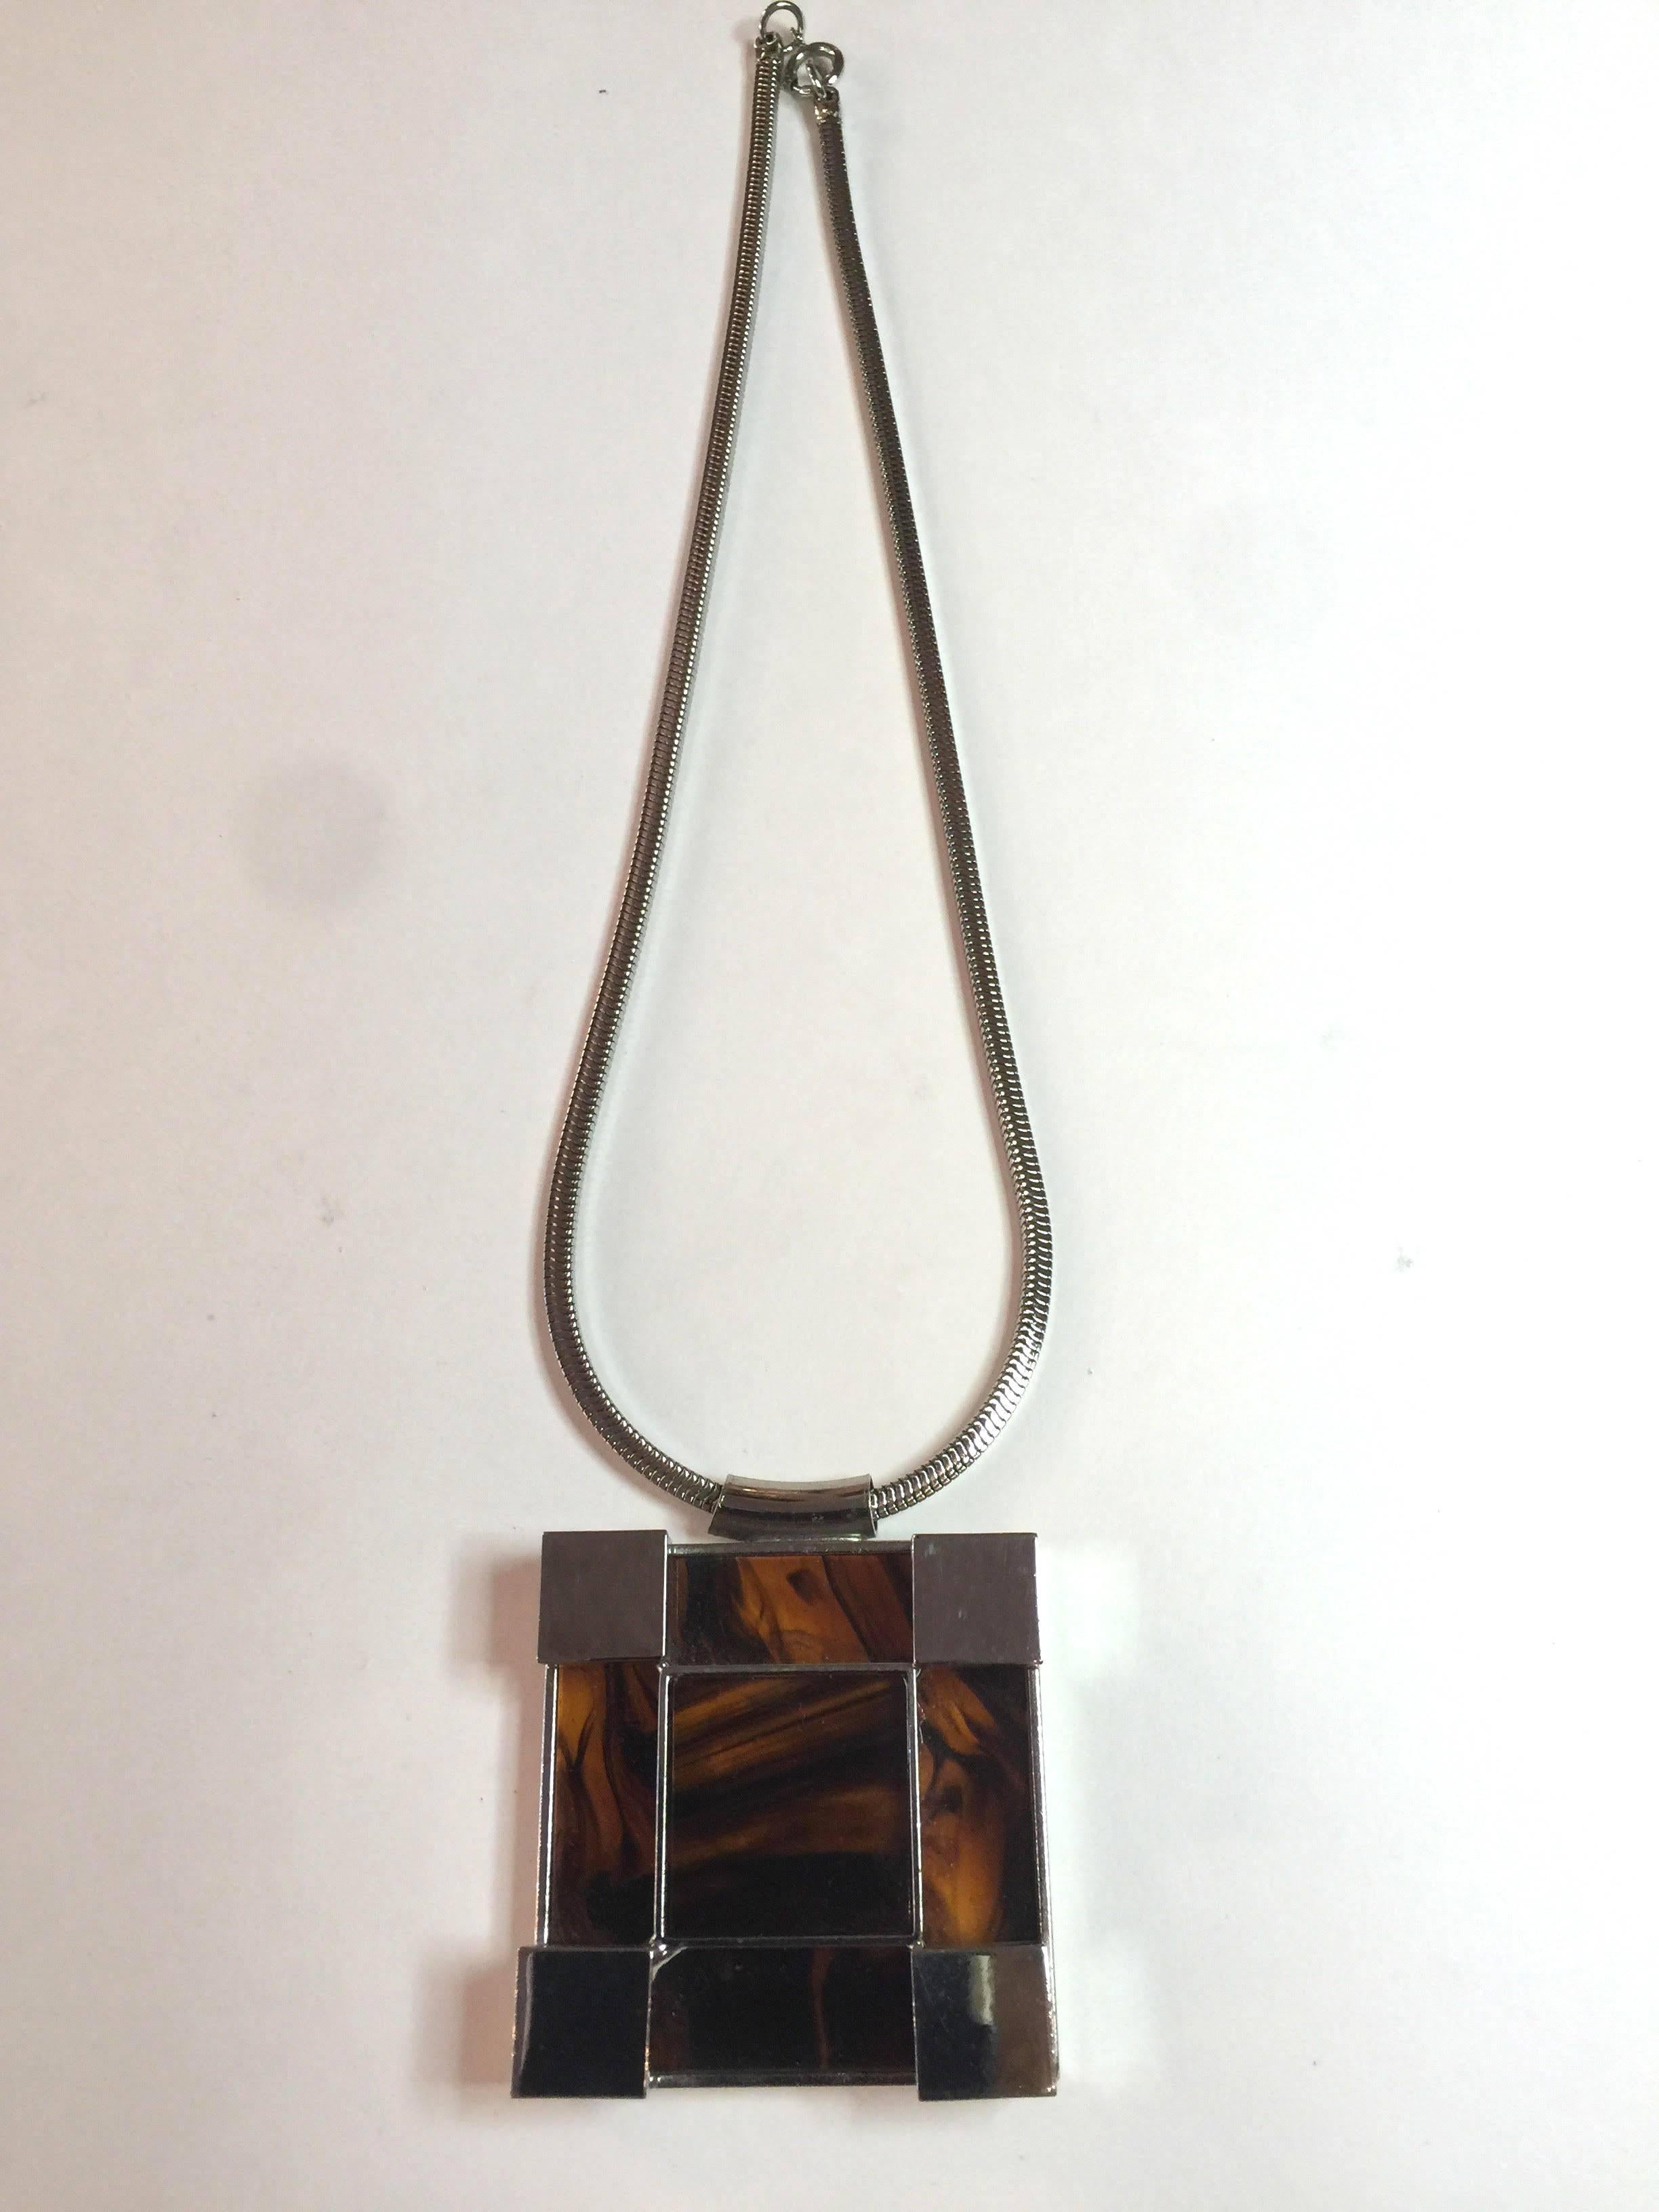 A wonderful unsigned chrome mid century modern square pendant necklace offers a sleek moderne look and certainly could be worn by both women and men. Concentric square detail and design is bold and impactful The square pendant drop is approximately